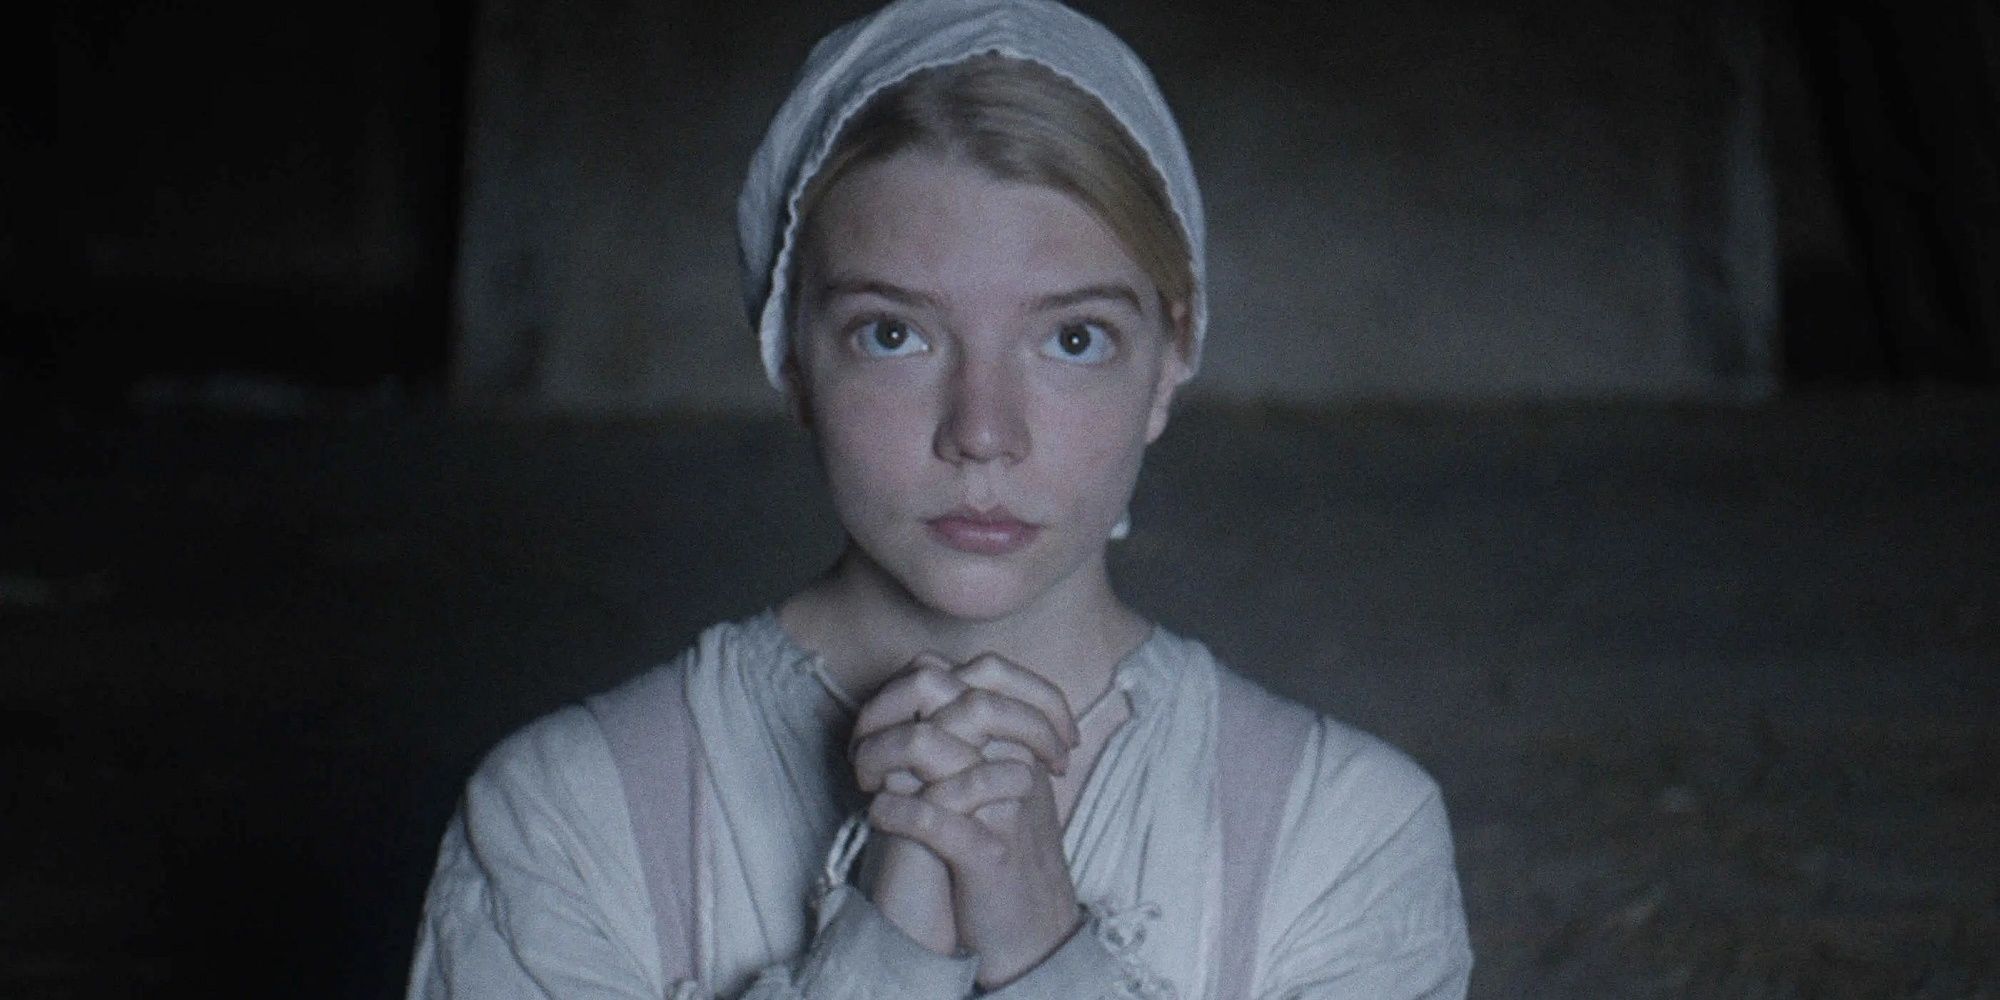 Thomasin prays at the beginning of The Witch.